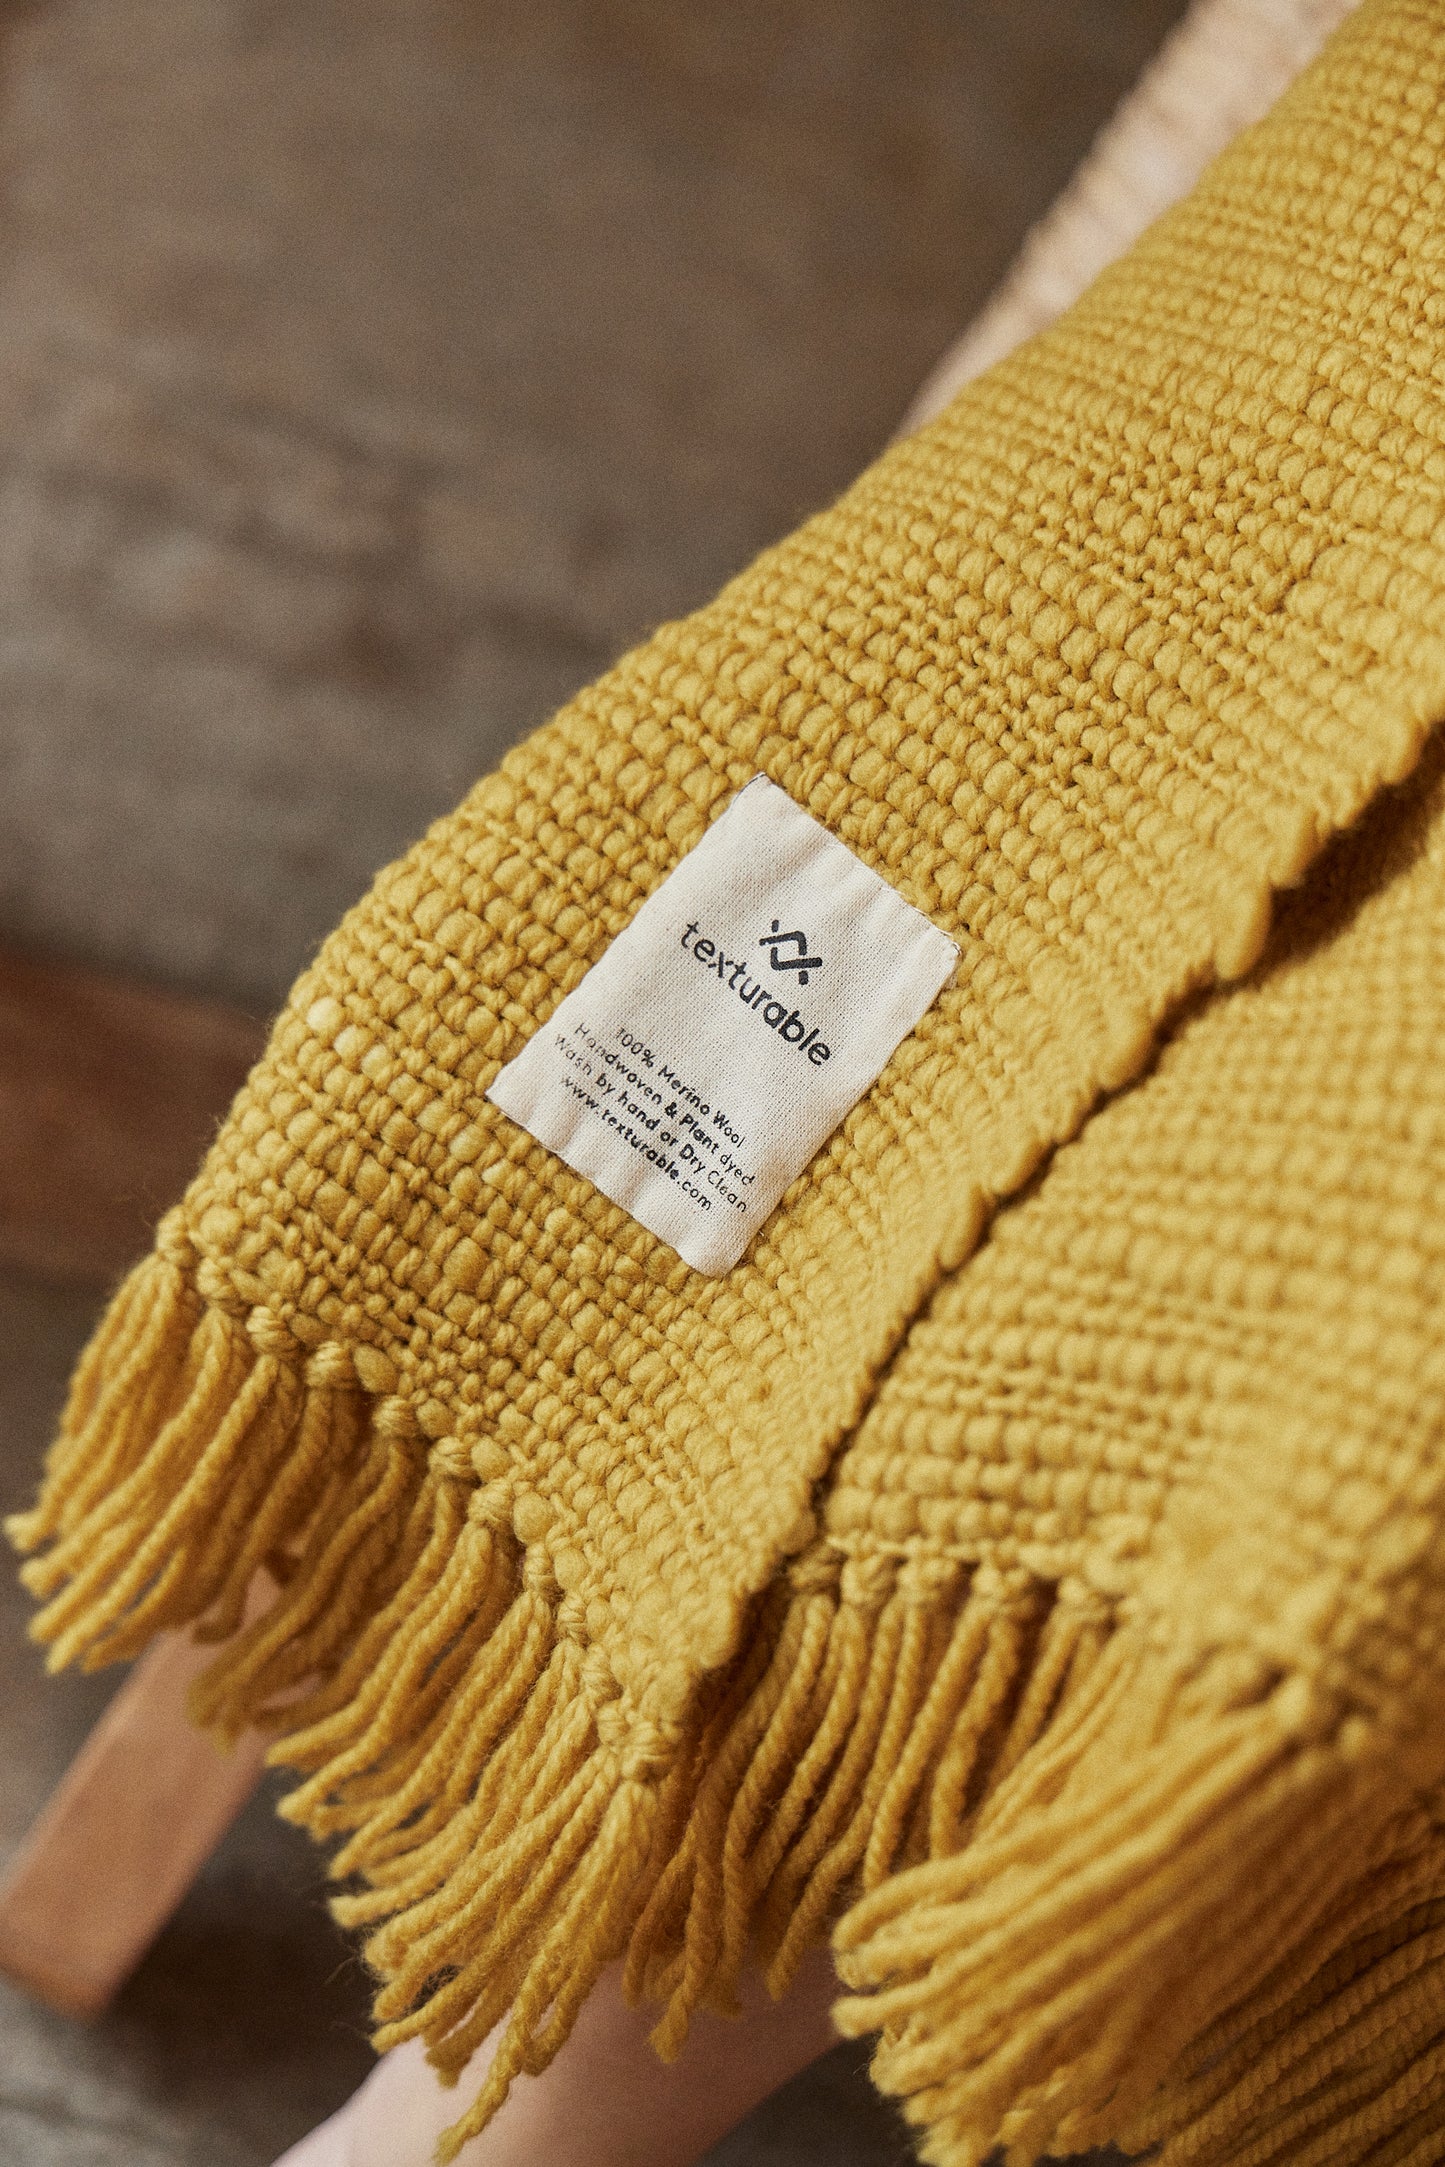 Organic Hand-Woven Merino Wool Blanket - Cozy up in Style with this Chunky Honeycomb Throw Blanket